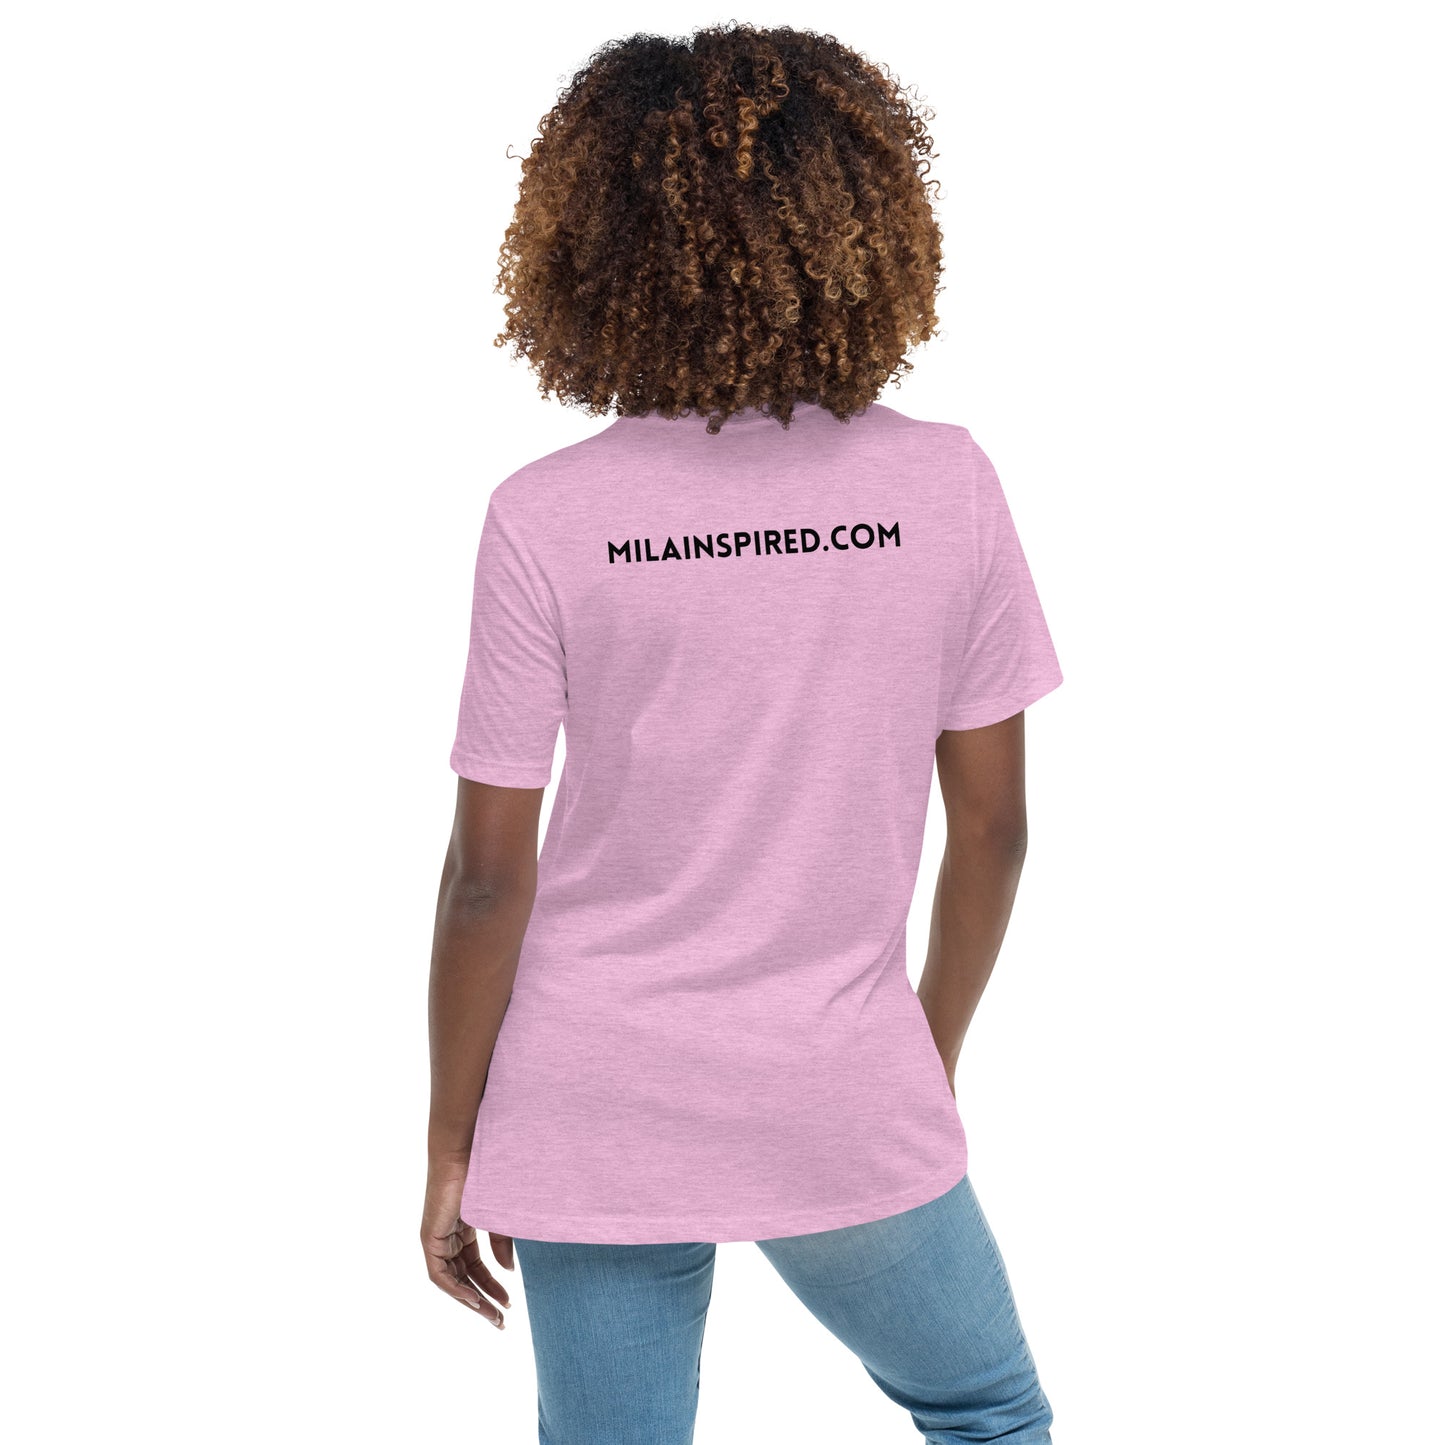 Mila Inspired Soft and Comfortable Women's Relaxed T-Shirt | Mila Inspired Logo Shirt | Soft & Comfortable Women's Tee